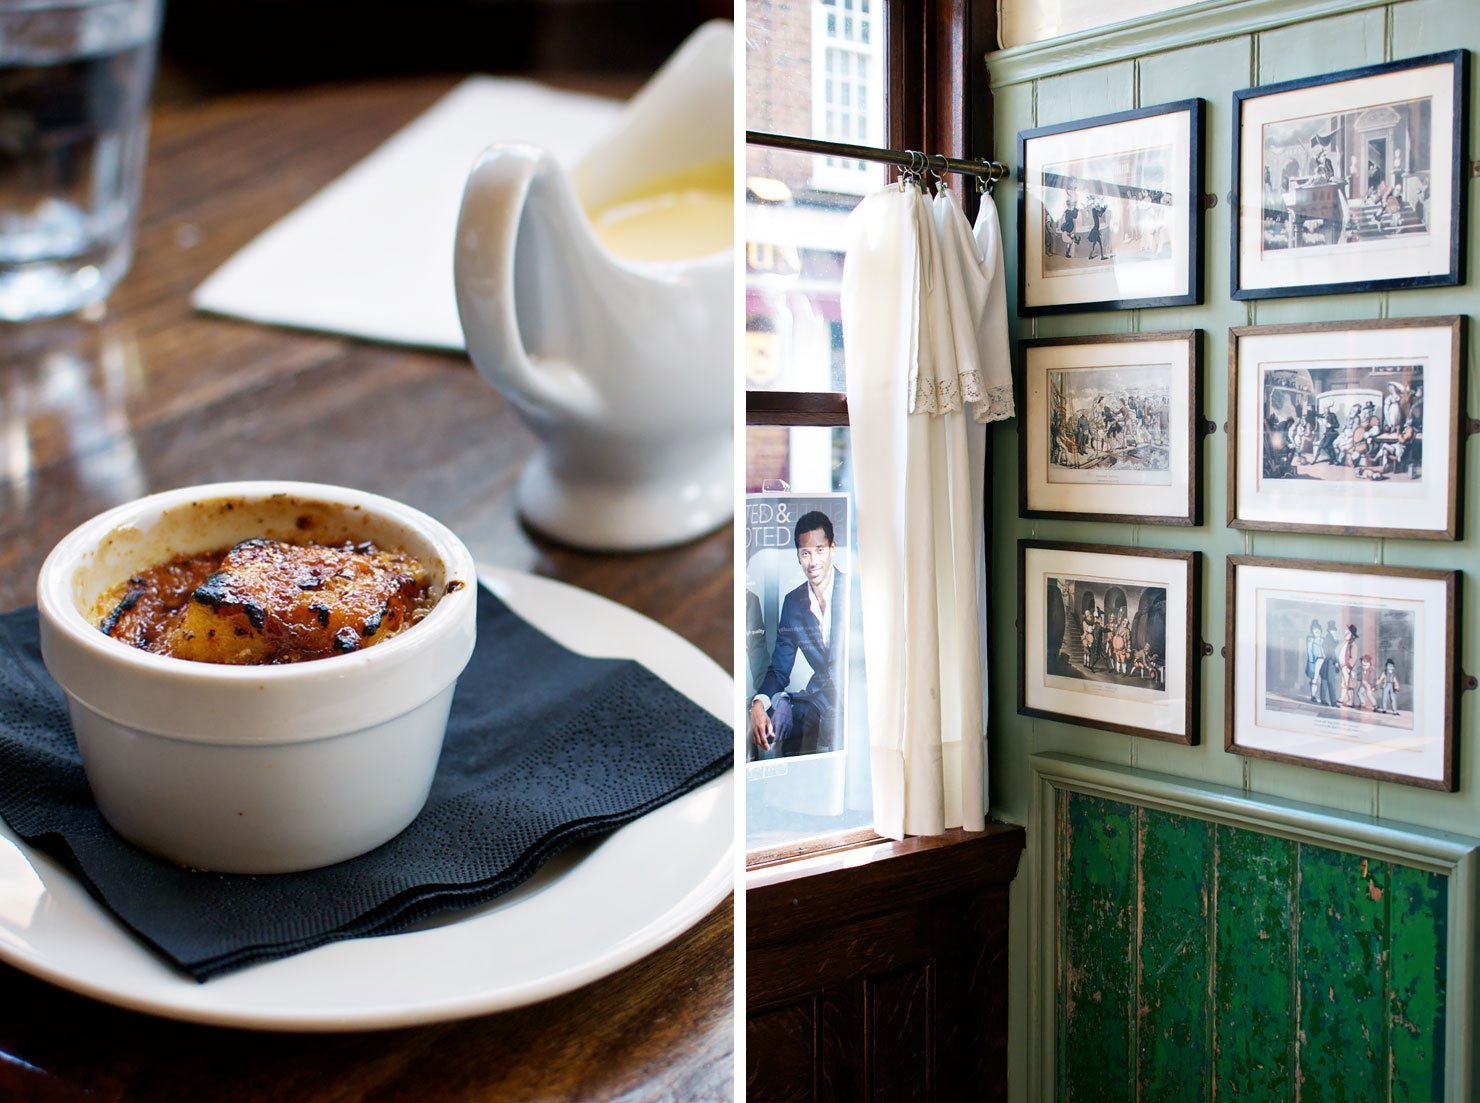 Review Eating London East End Food Tour: The English Restaurant - bread and butter pudding with rum custard